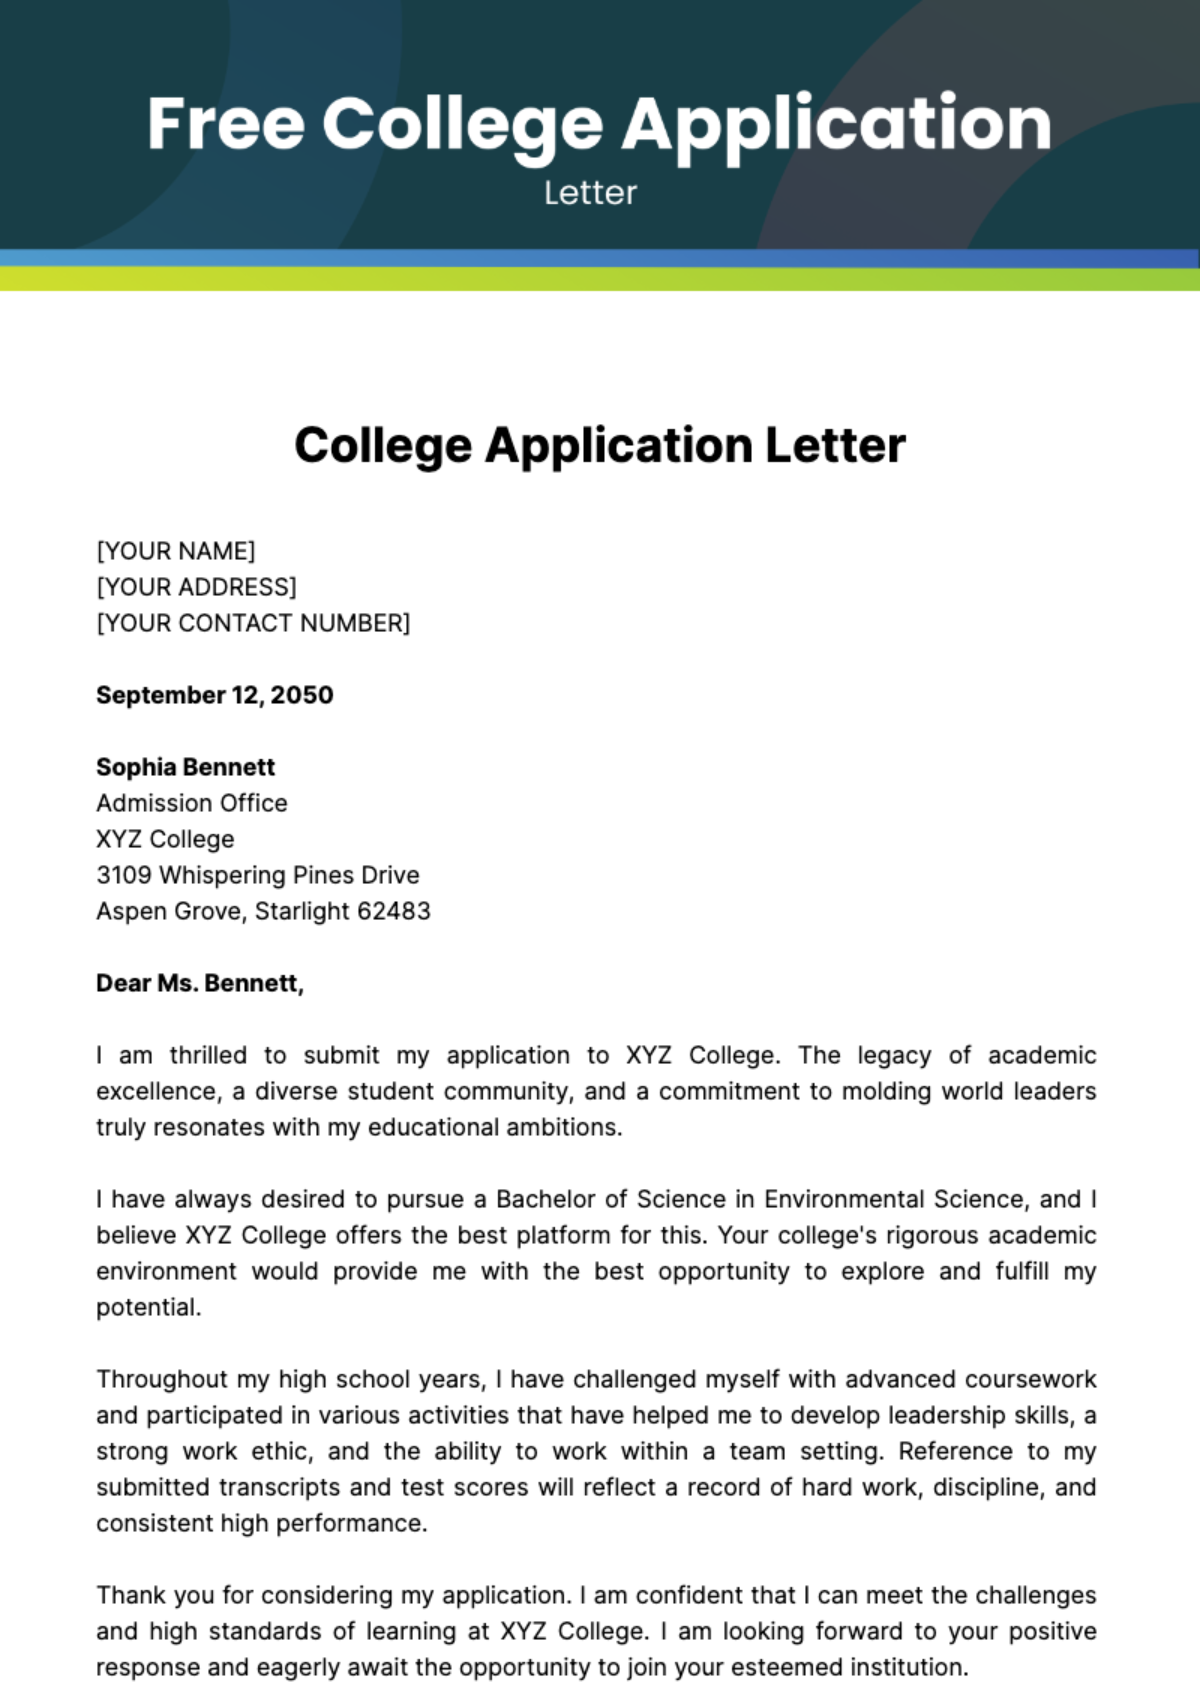 Free College Application Letter Template